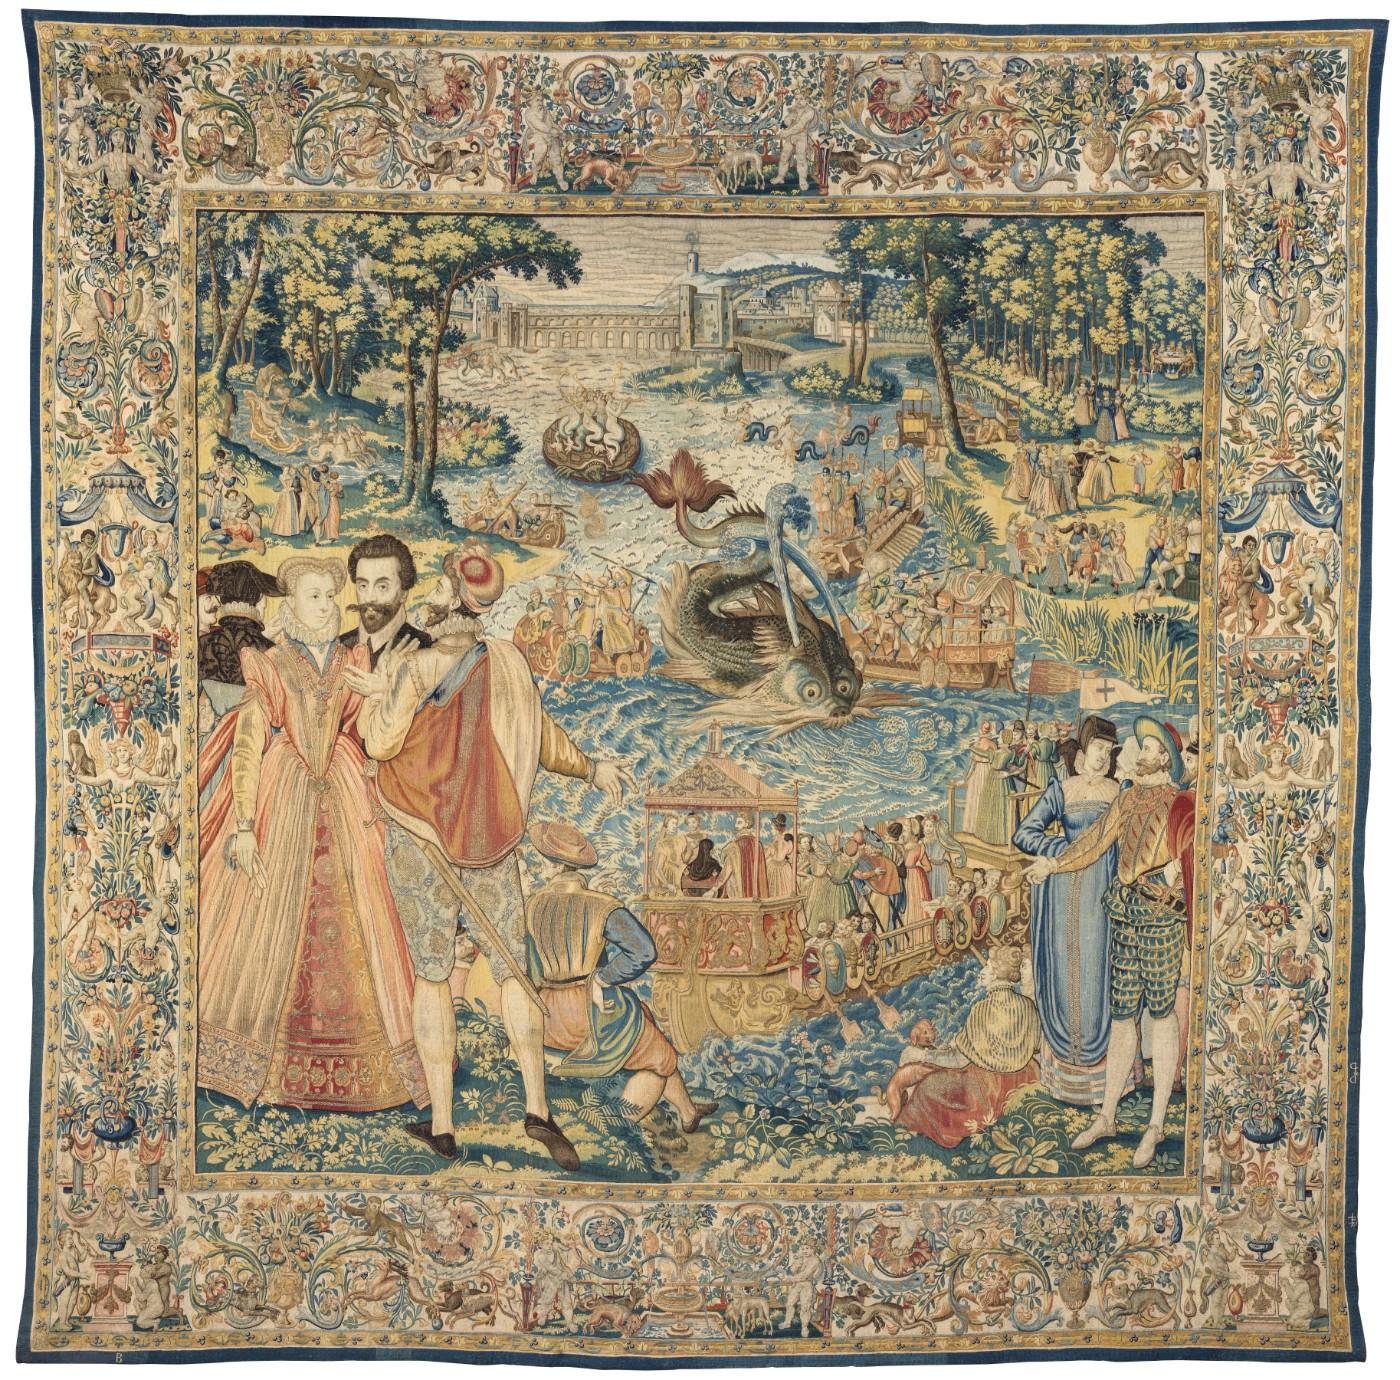 Cleveland Museum of Art Debuts Newly Restored Valois Tapestries 